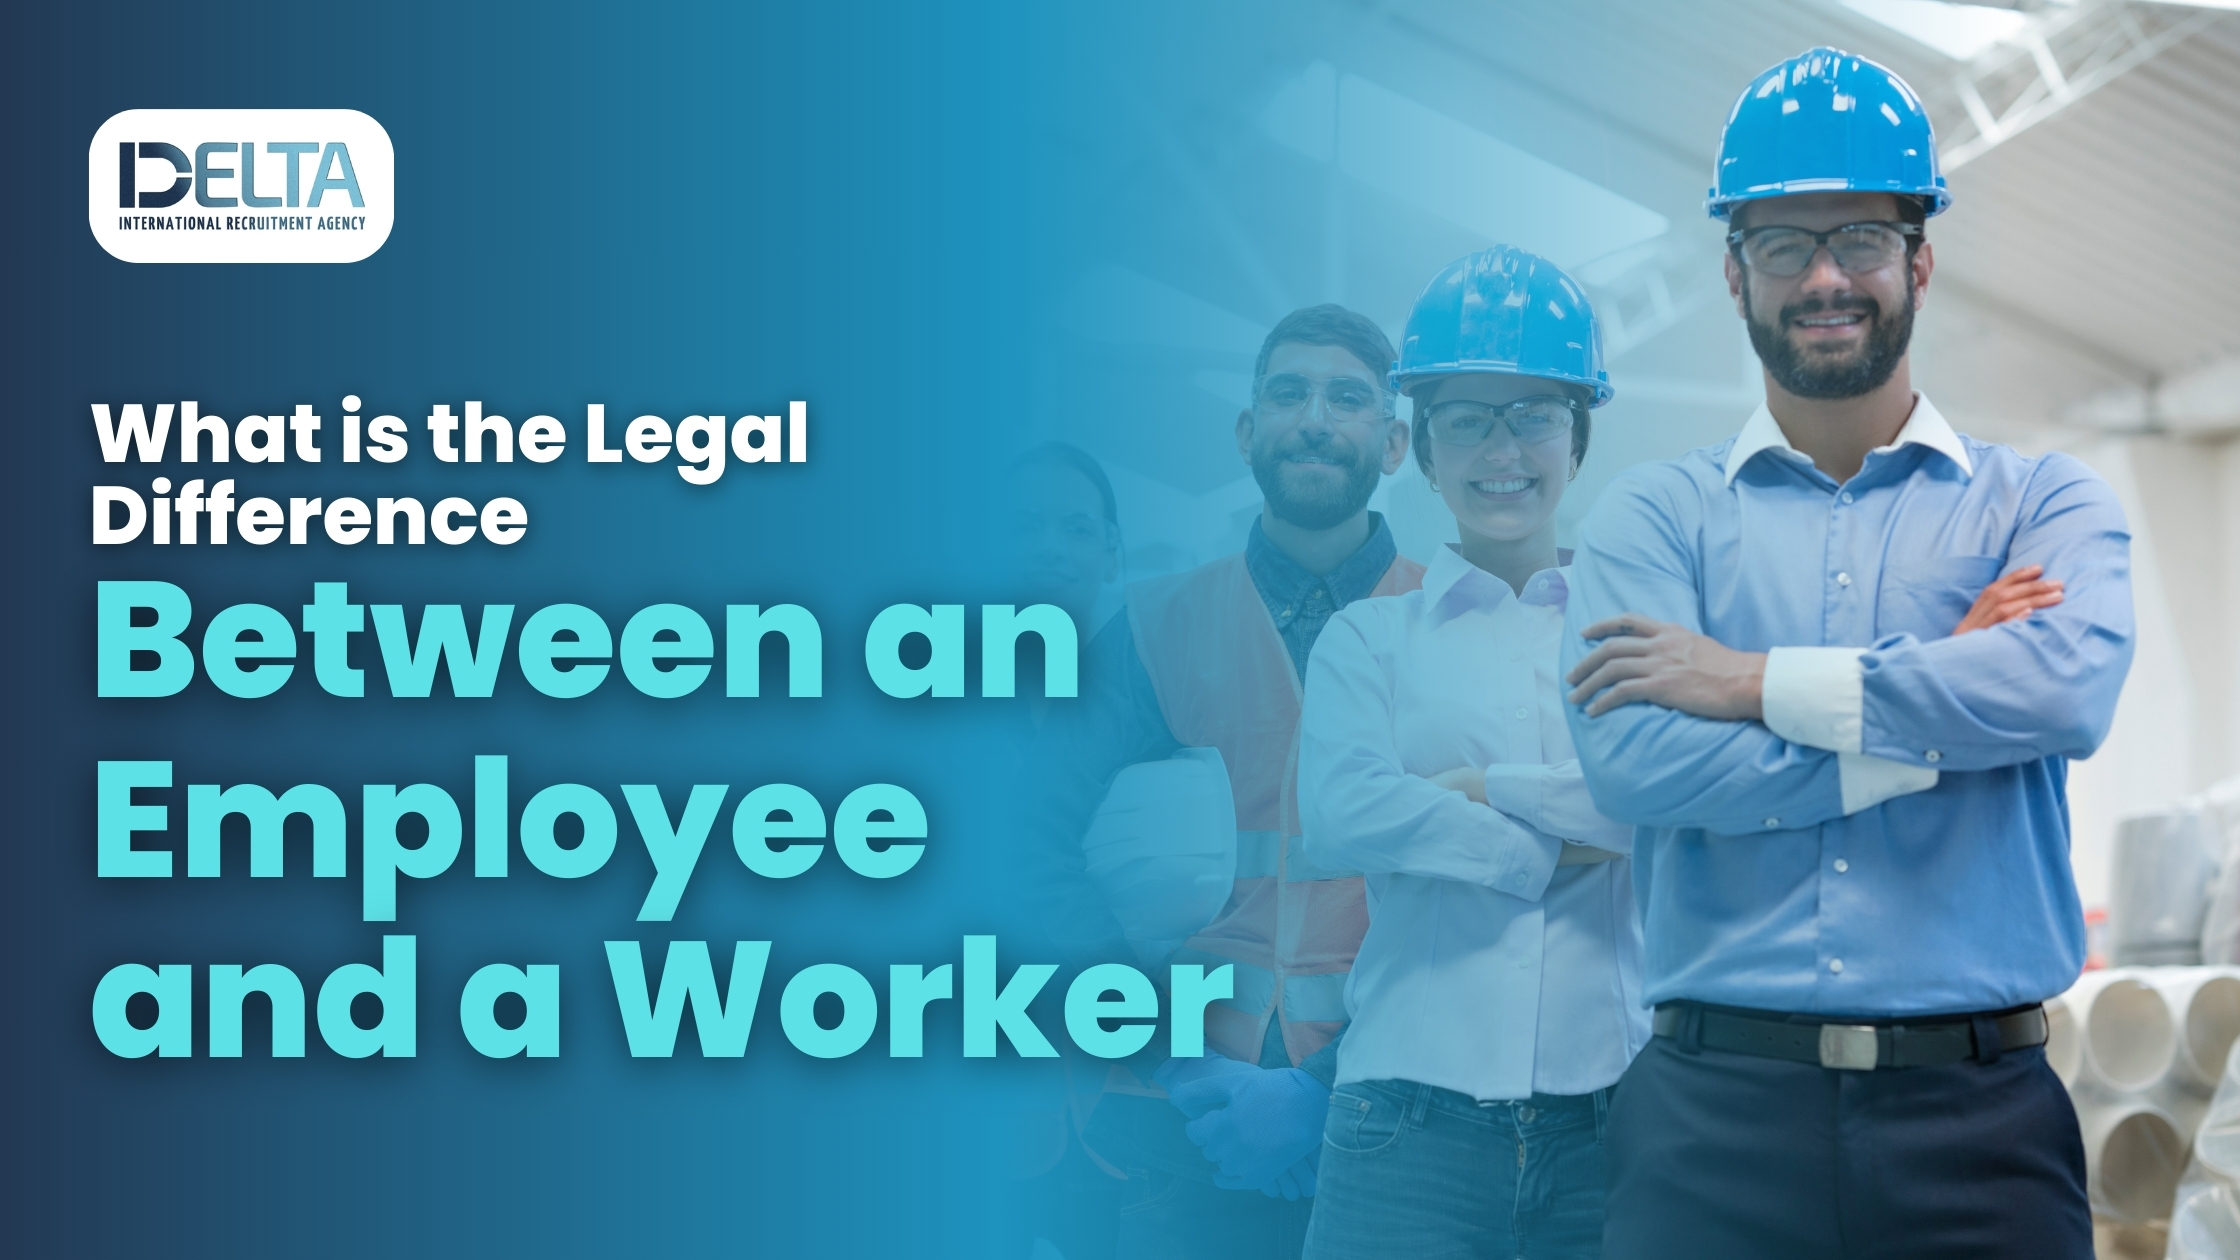 What is the Legal Difference Between an Employee and Worker?